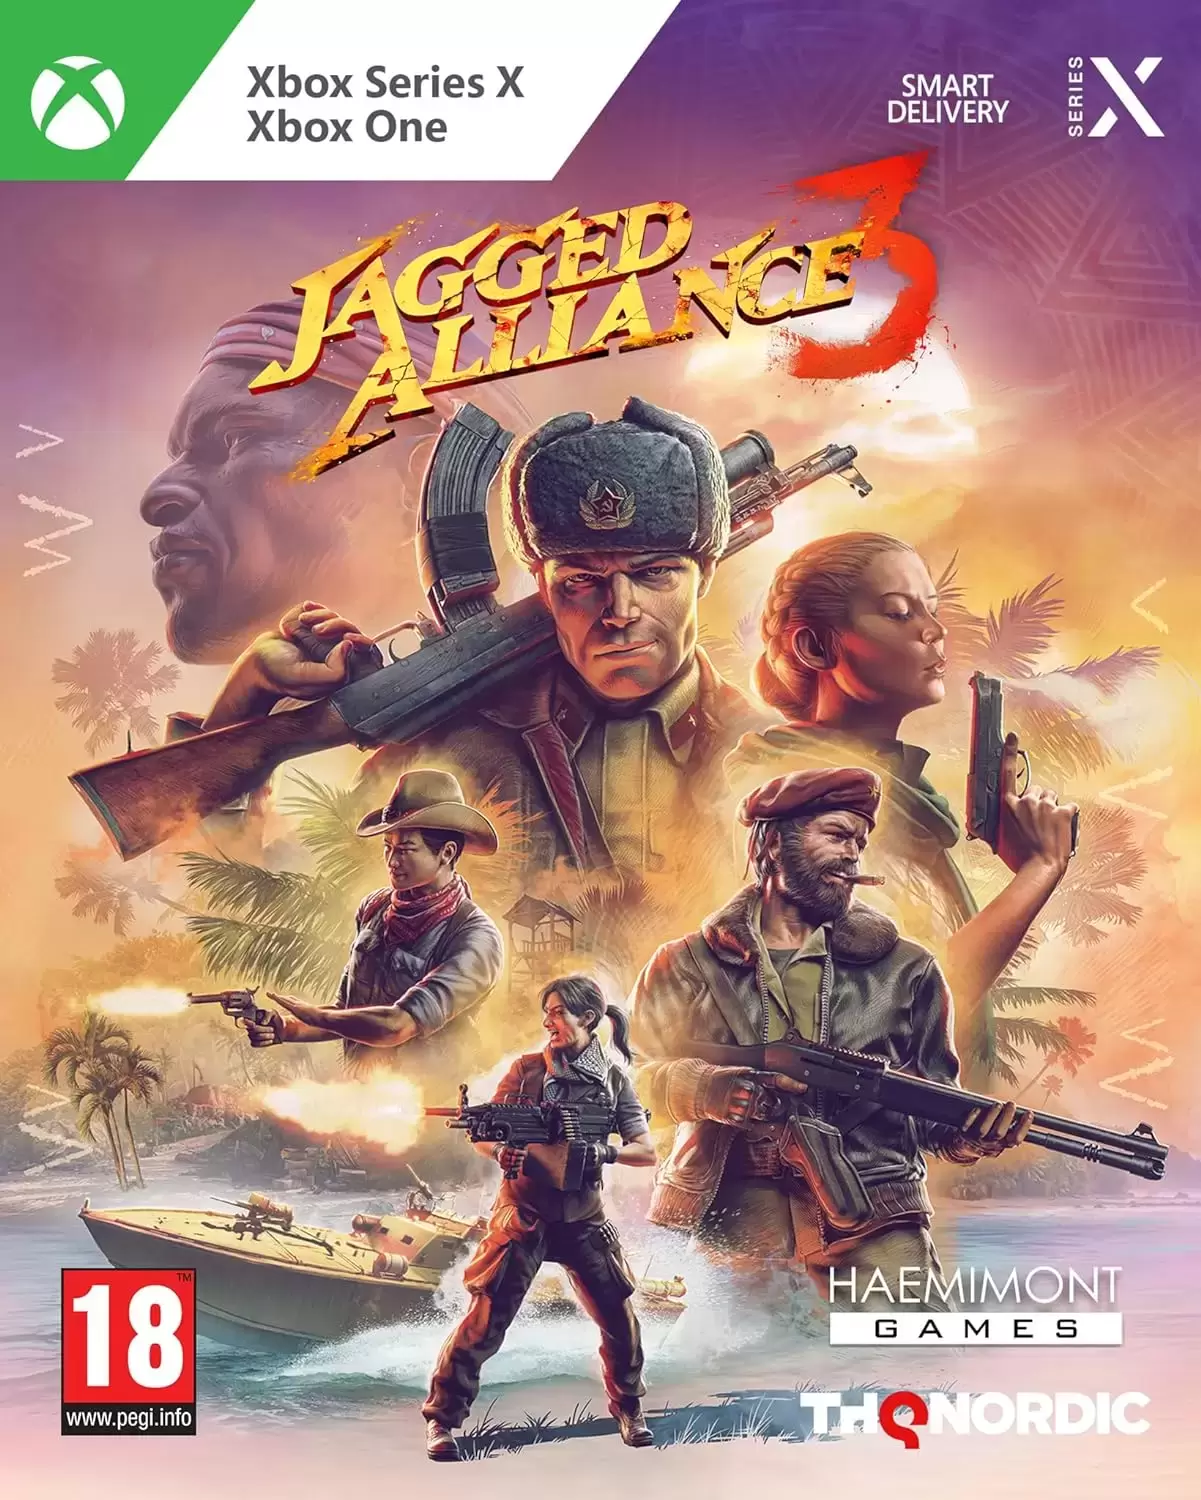 XBOX One Games - Jagged Alliance 3